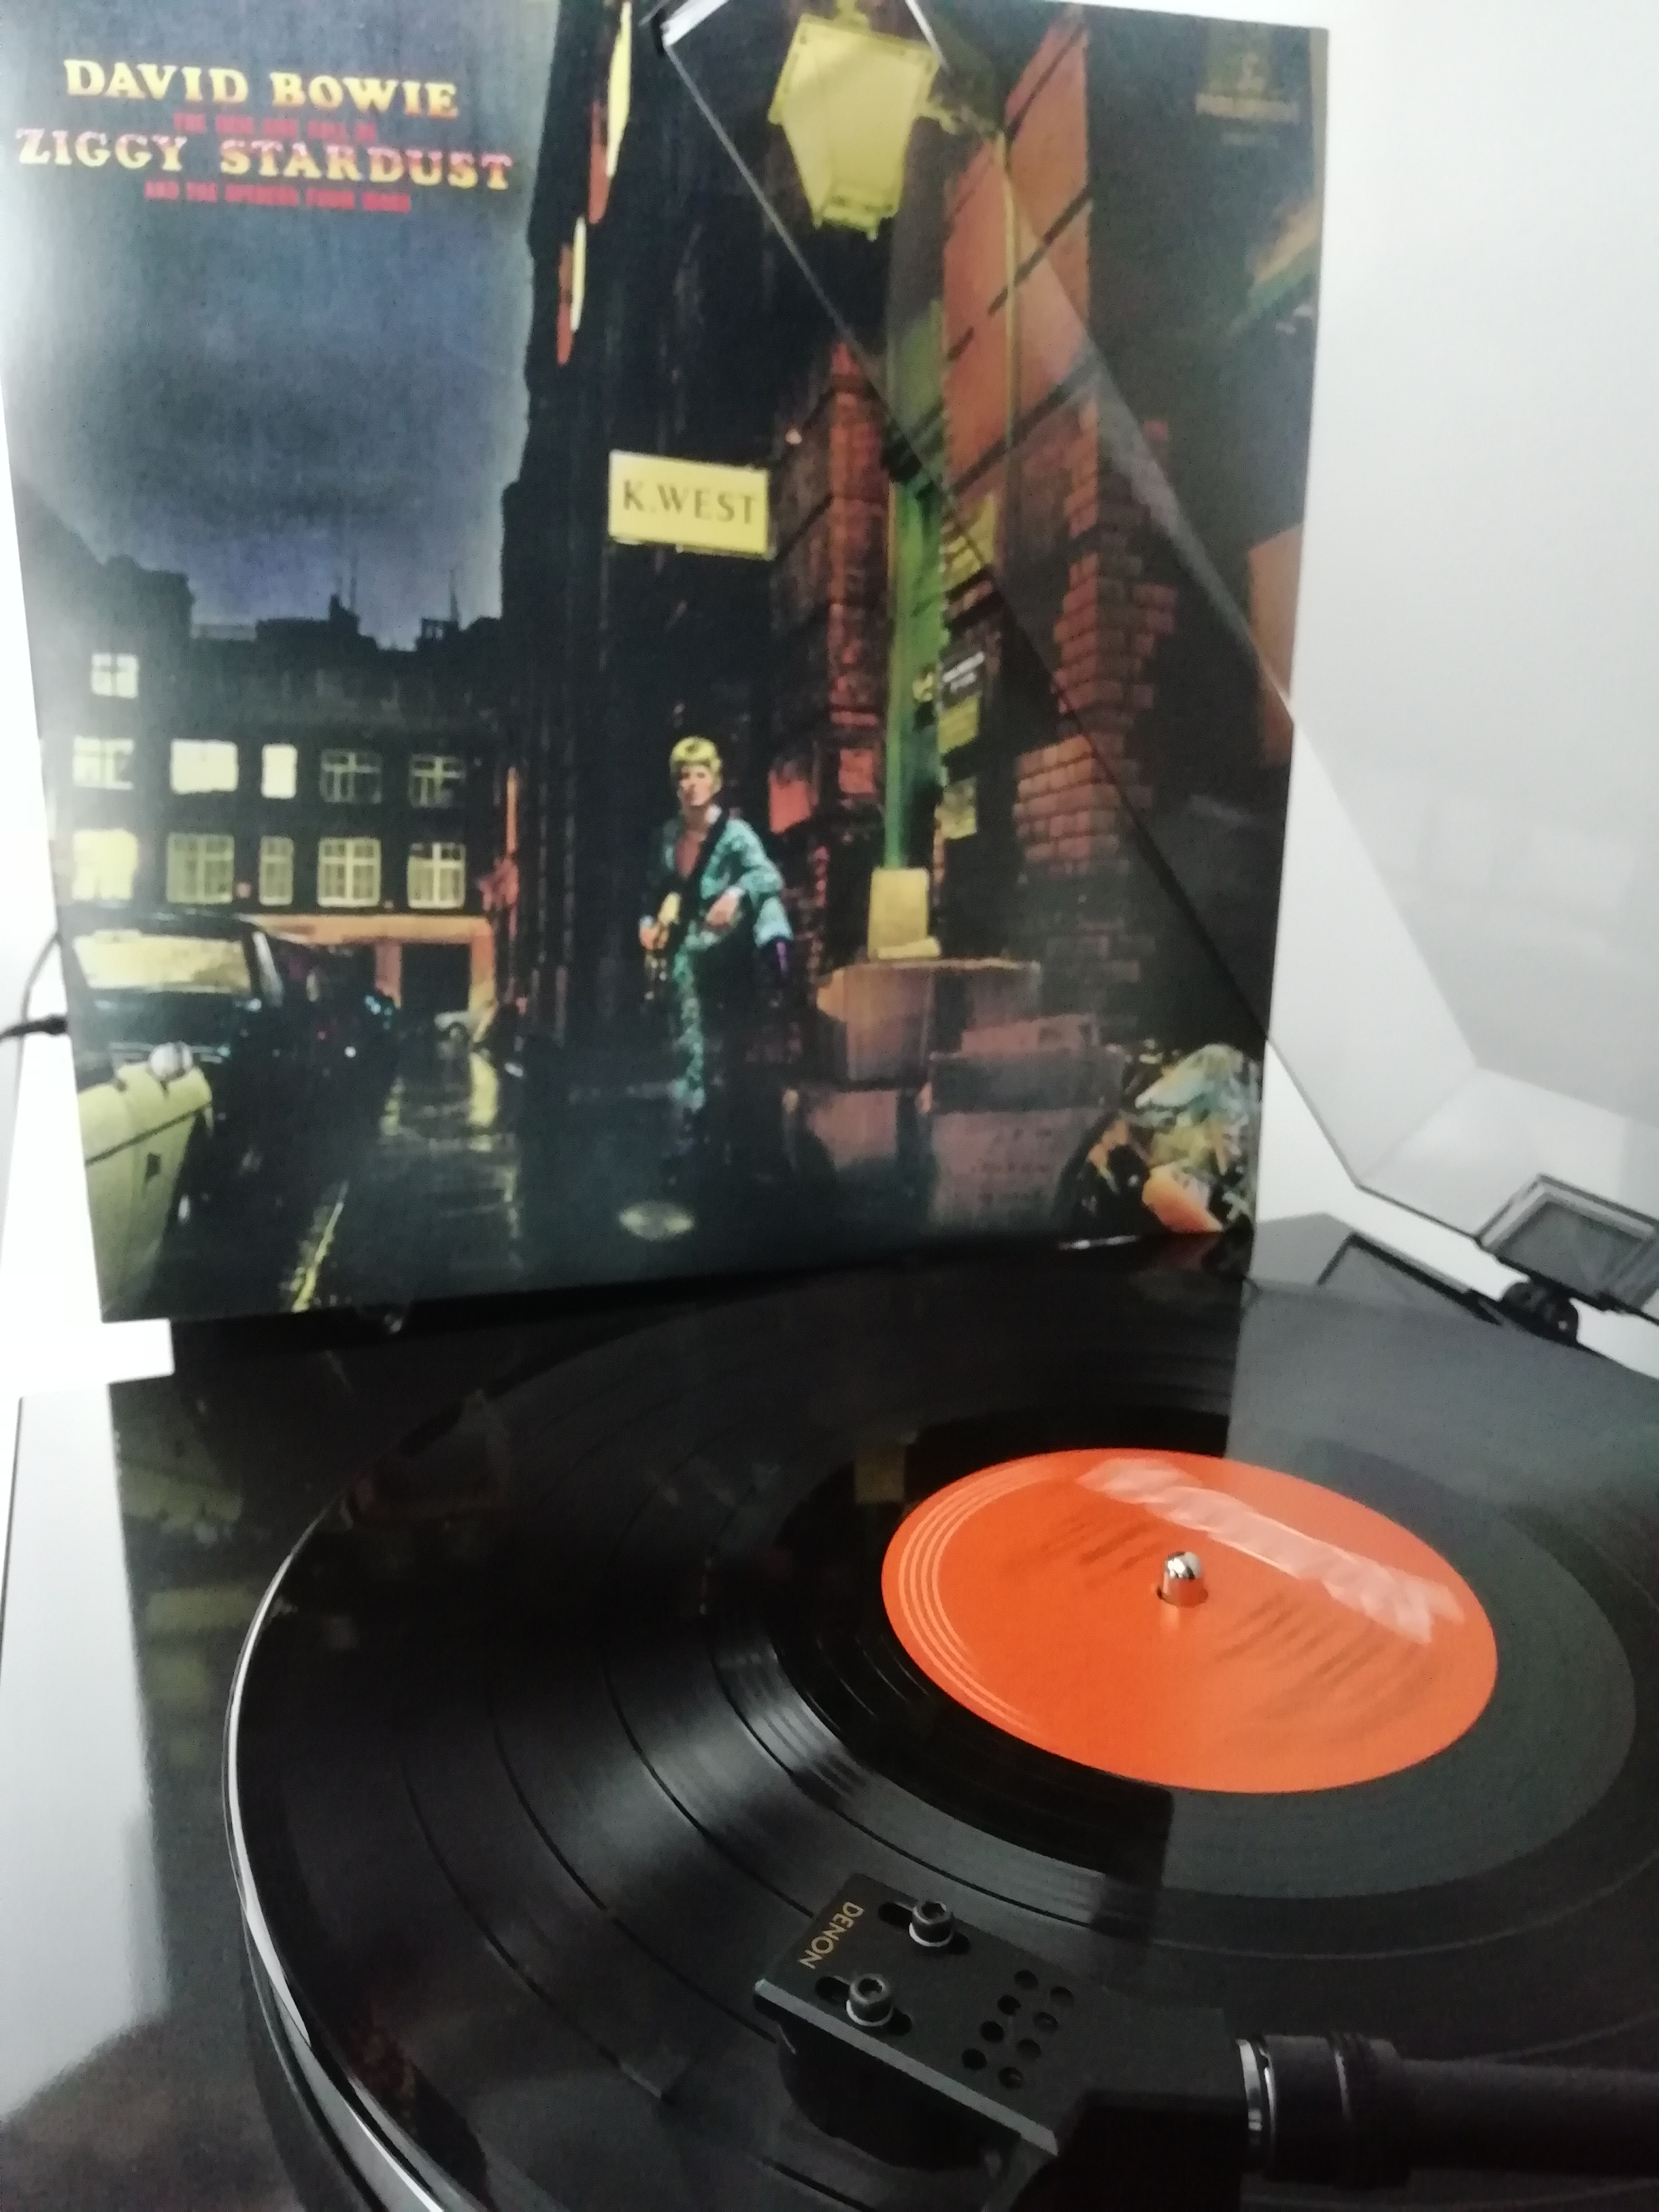  The Rise and Fall of Ziggy Stardust David Bowie Format : Album vinyle